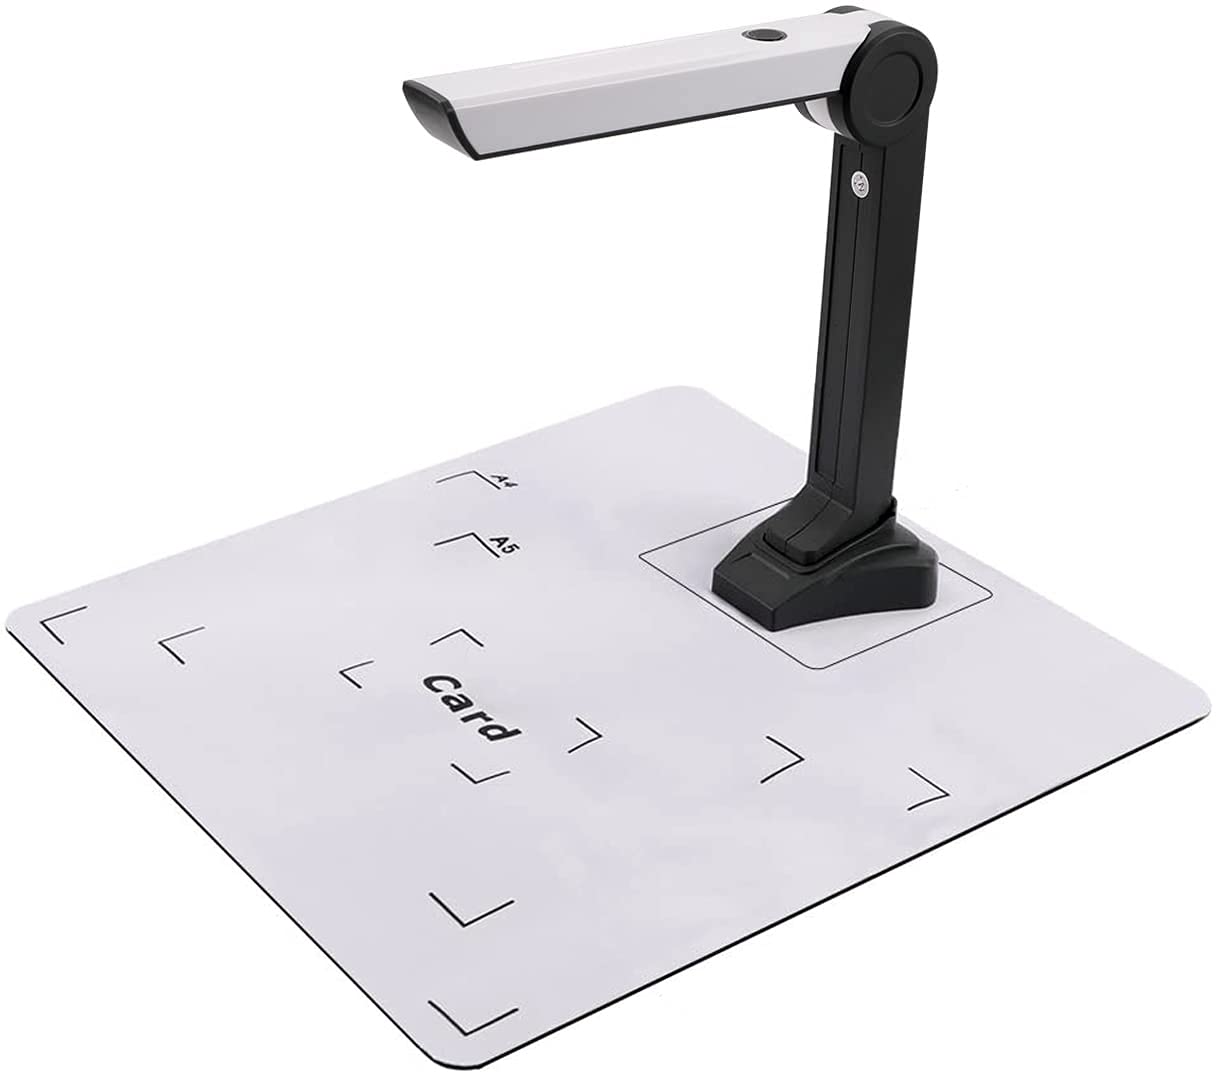 eloam Portable Document Scanner Camera S200L,Document Reader for Computers,Video Recording for Office Presentation Solution